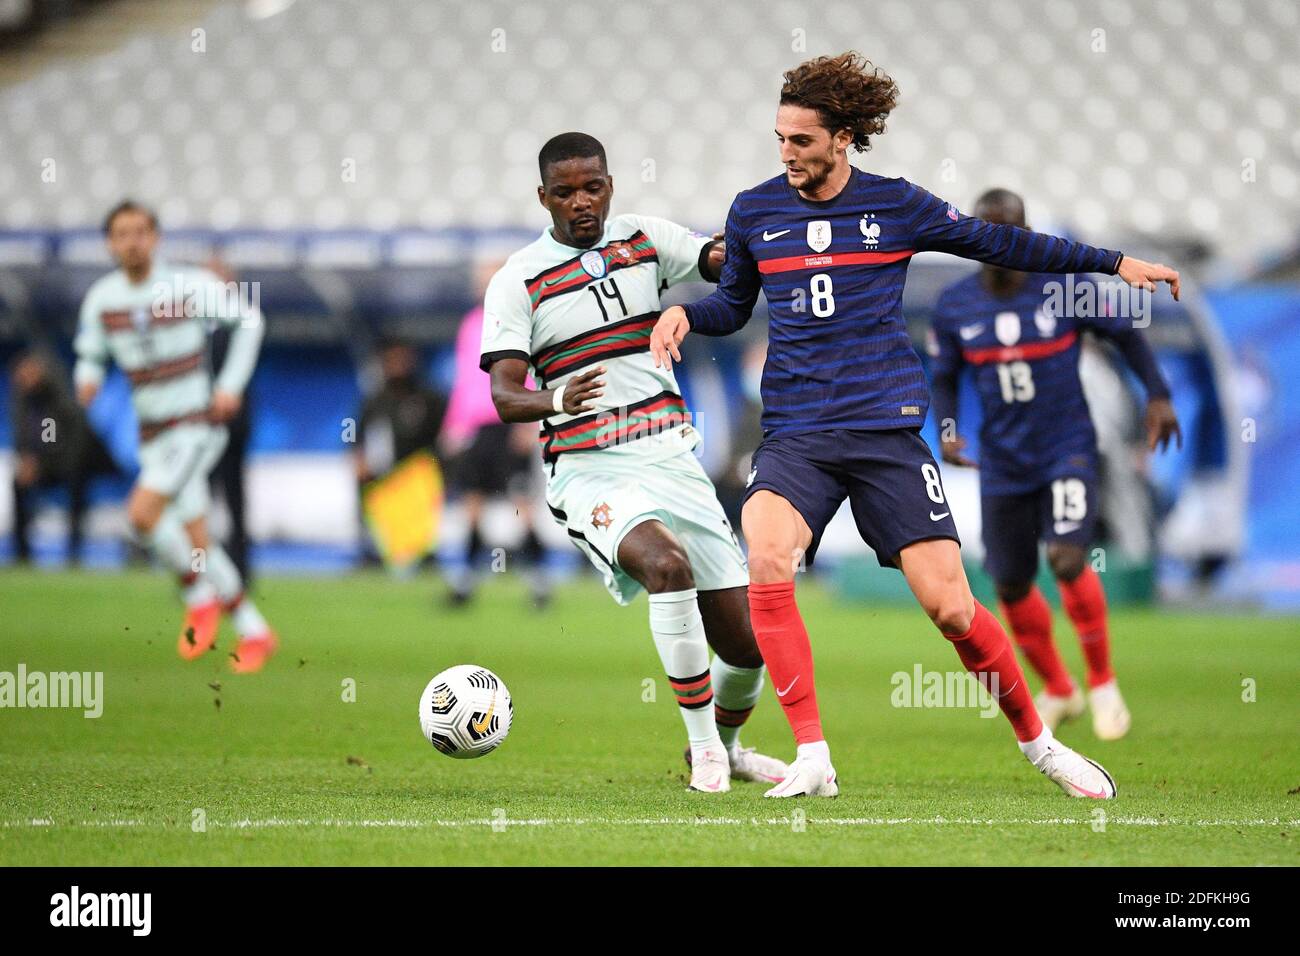 Adrien Rabiot of France and William Carvalho of Portugal in action during the UEFA Nations League group stage match between France and Portugal at Stade de France, on October 11, 2020 in Paris, France. Photo by David Niviere/ABACAPRESS.COM Stock Photo